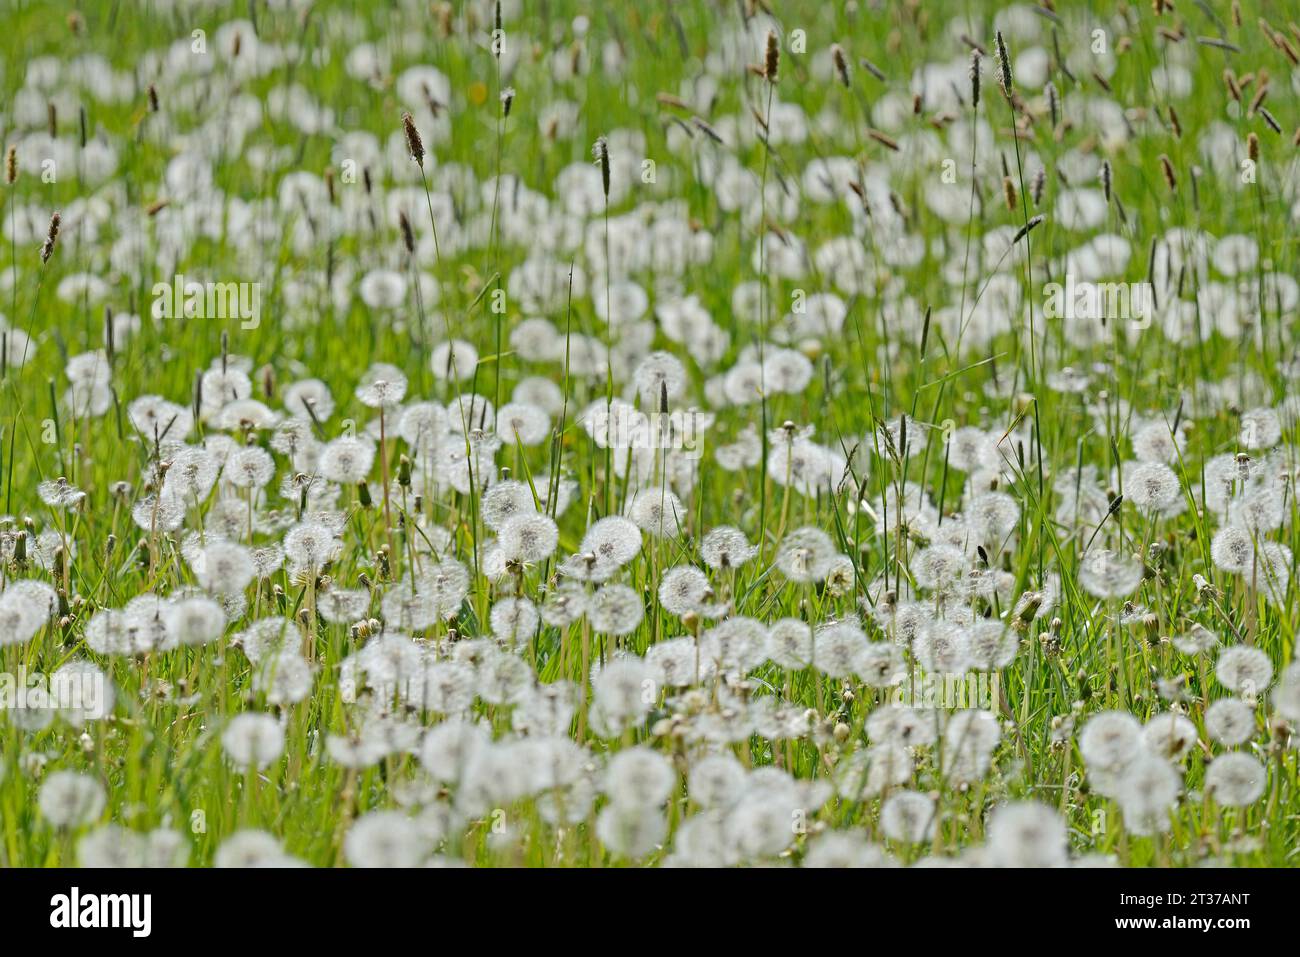 Meadow with sweet grass Meadow foxtail (Alopecurus pratensis), common dandelion (Taraxacum sect. Ruderalia) with fruiting plants, North Stock Photo